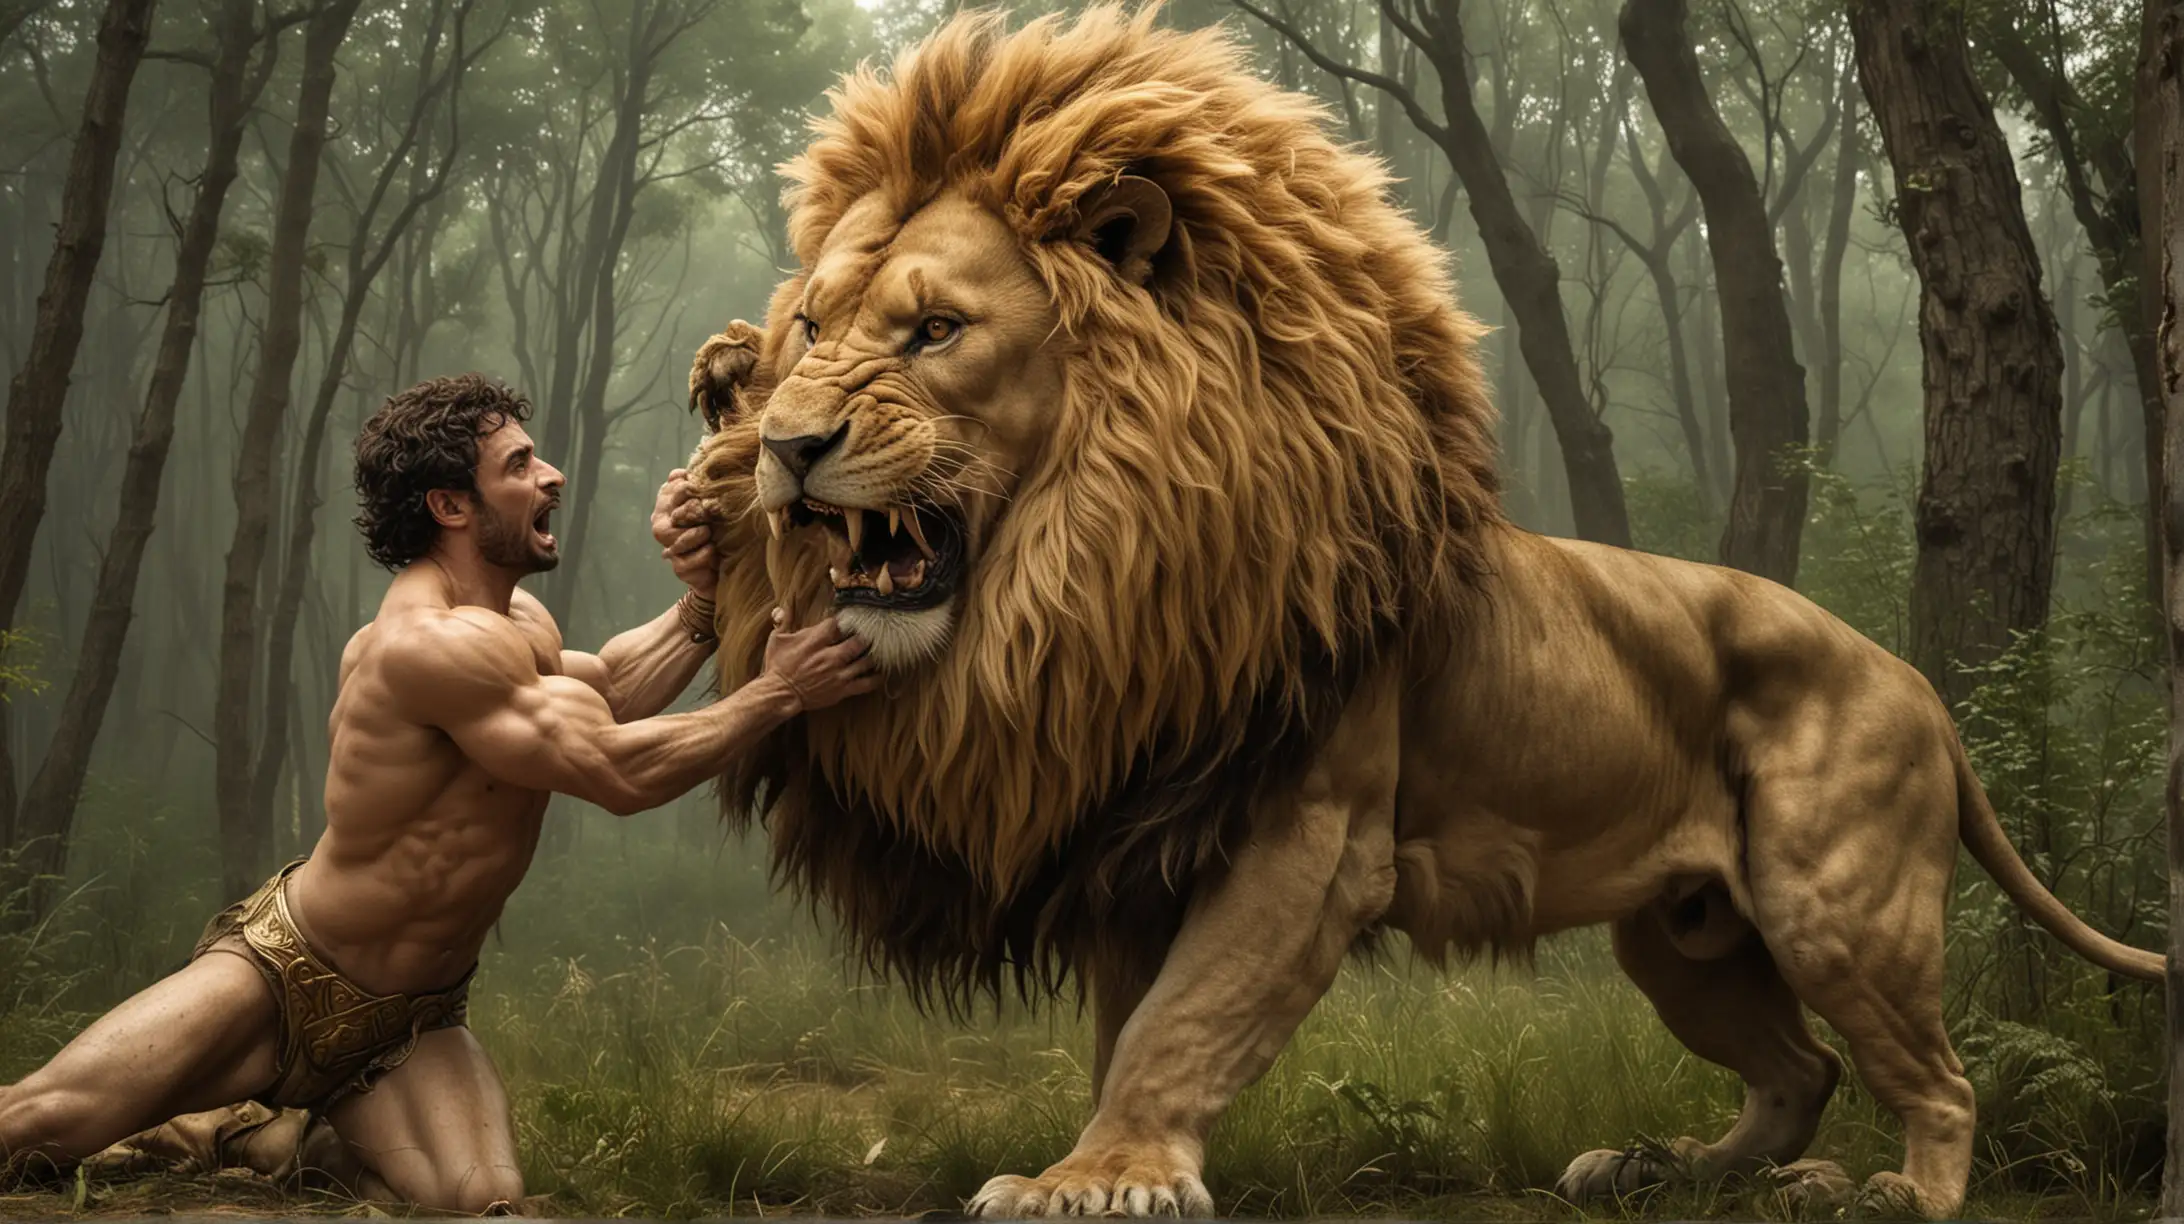 Muscular Greek Hero Wrestles Gigantic Lion in Forest Clearing